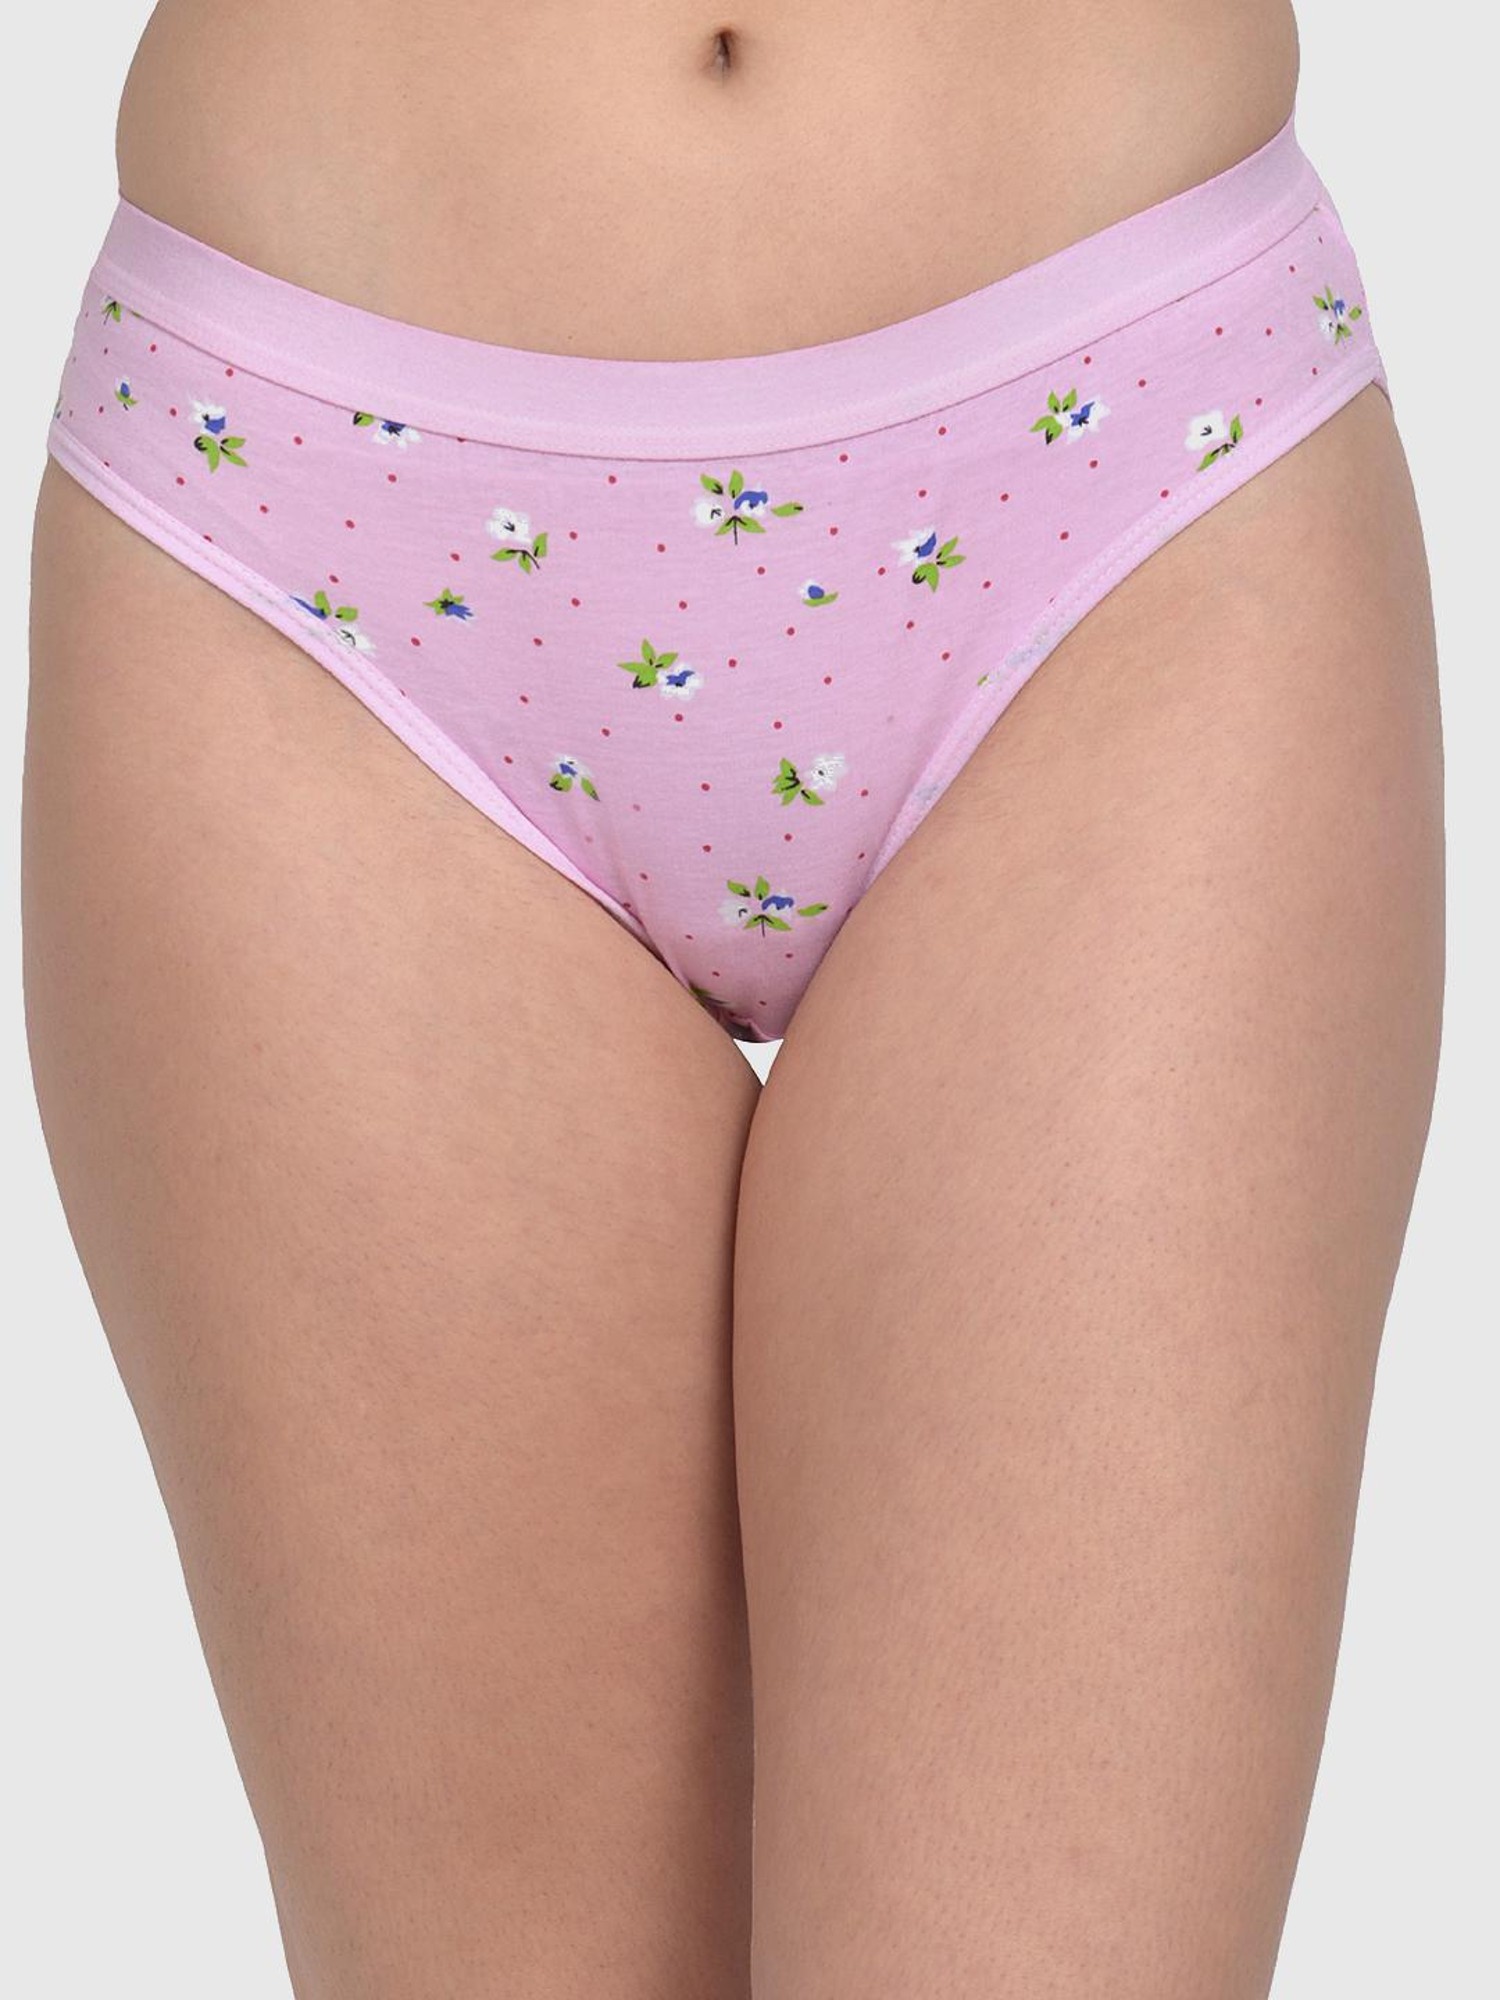 Pink Color Floral Printed Cotton Underwear For Women